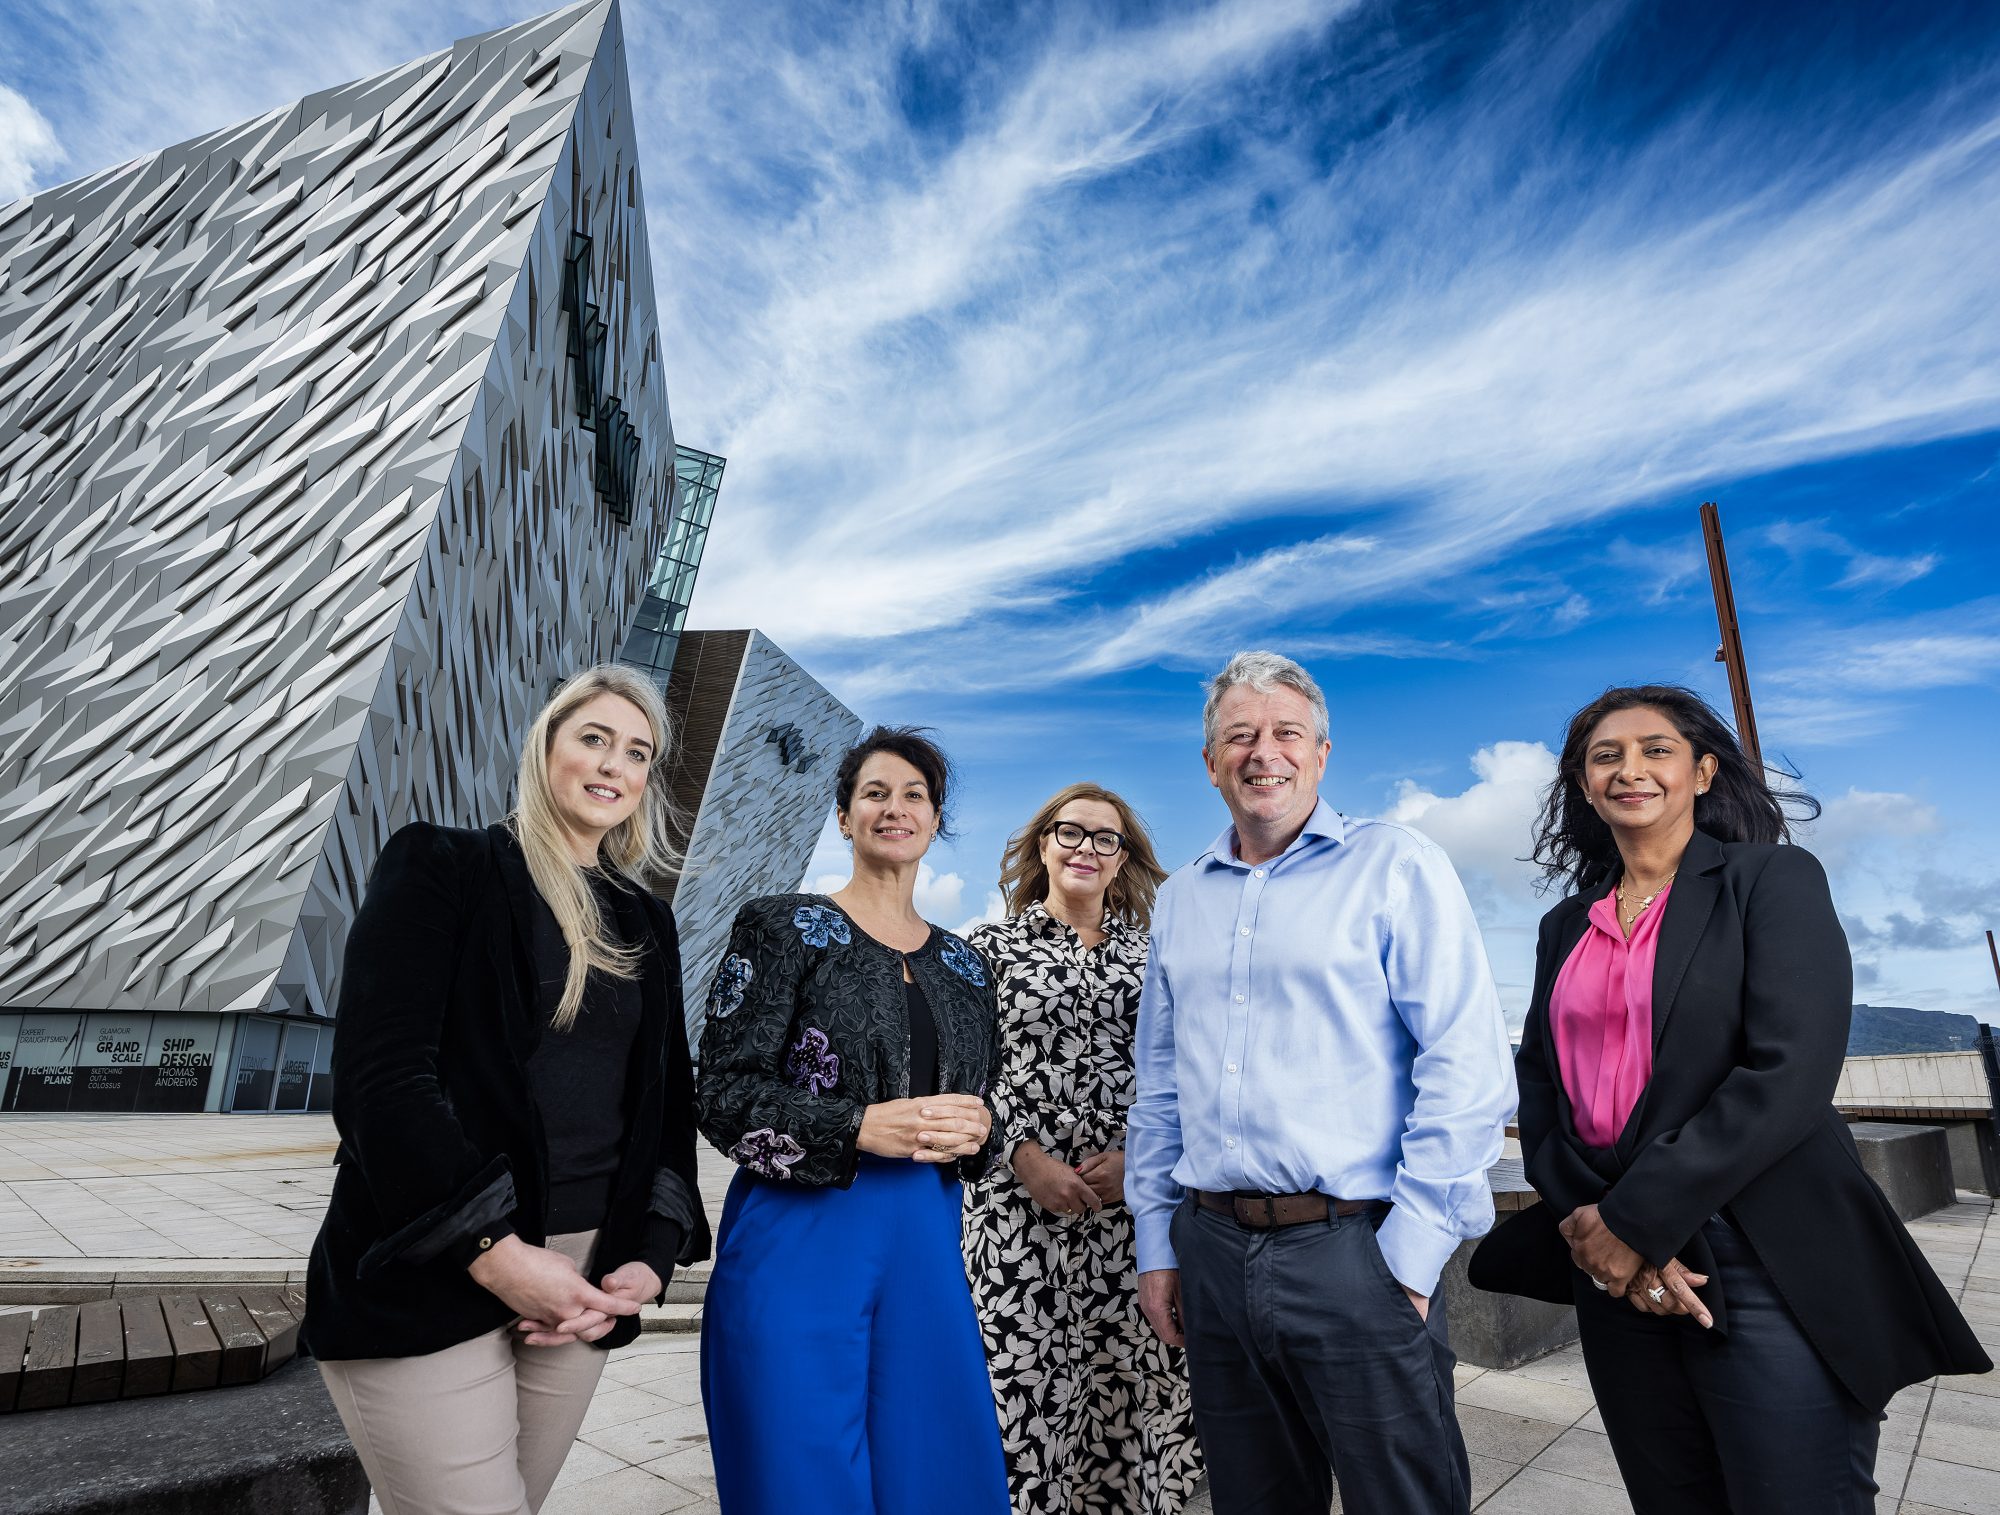 Venture Capital firms converge on Belfast to meet exciting NI start-ups and scale-ups at Catalyst’s Inbound Investors event